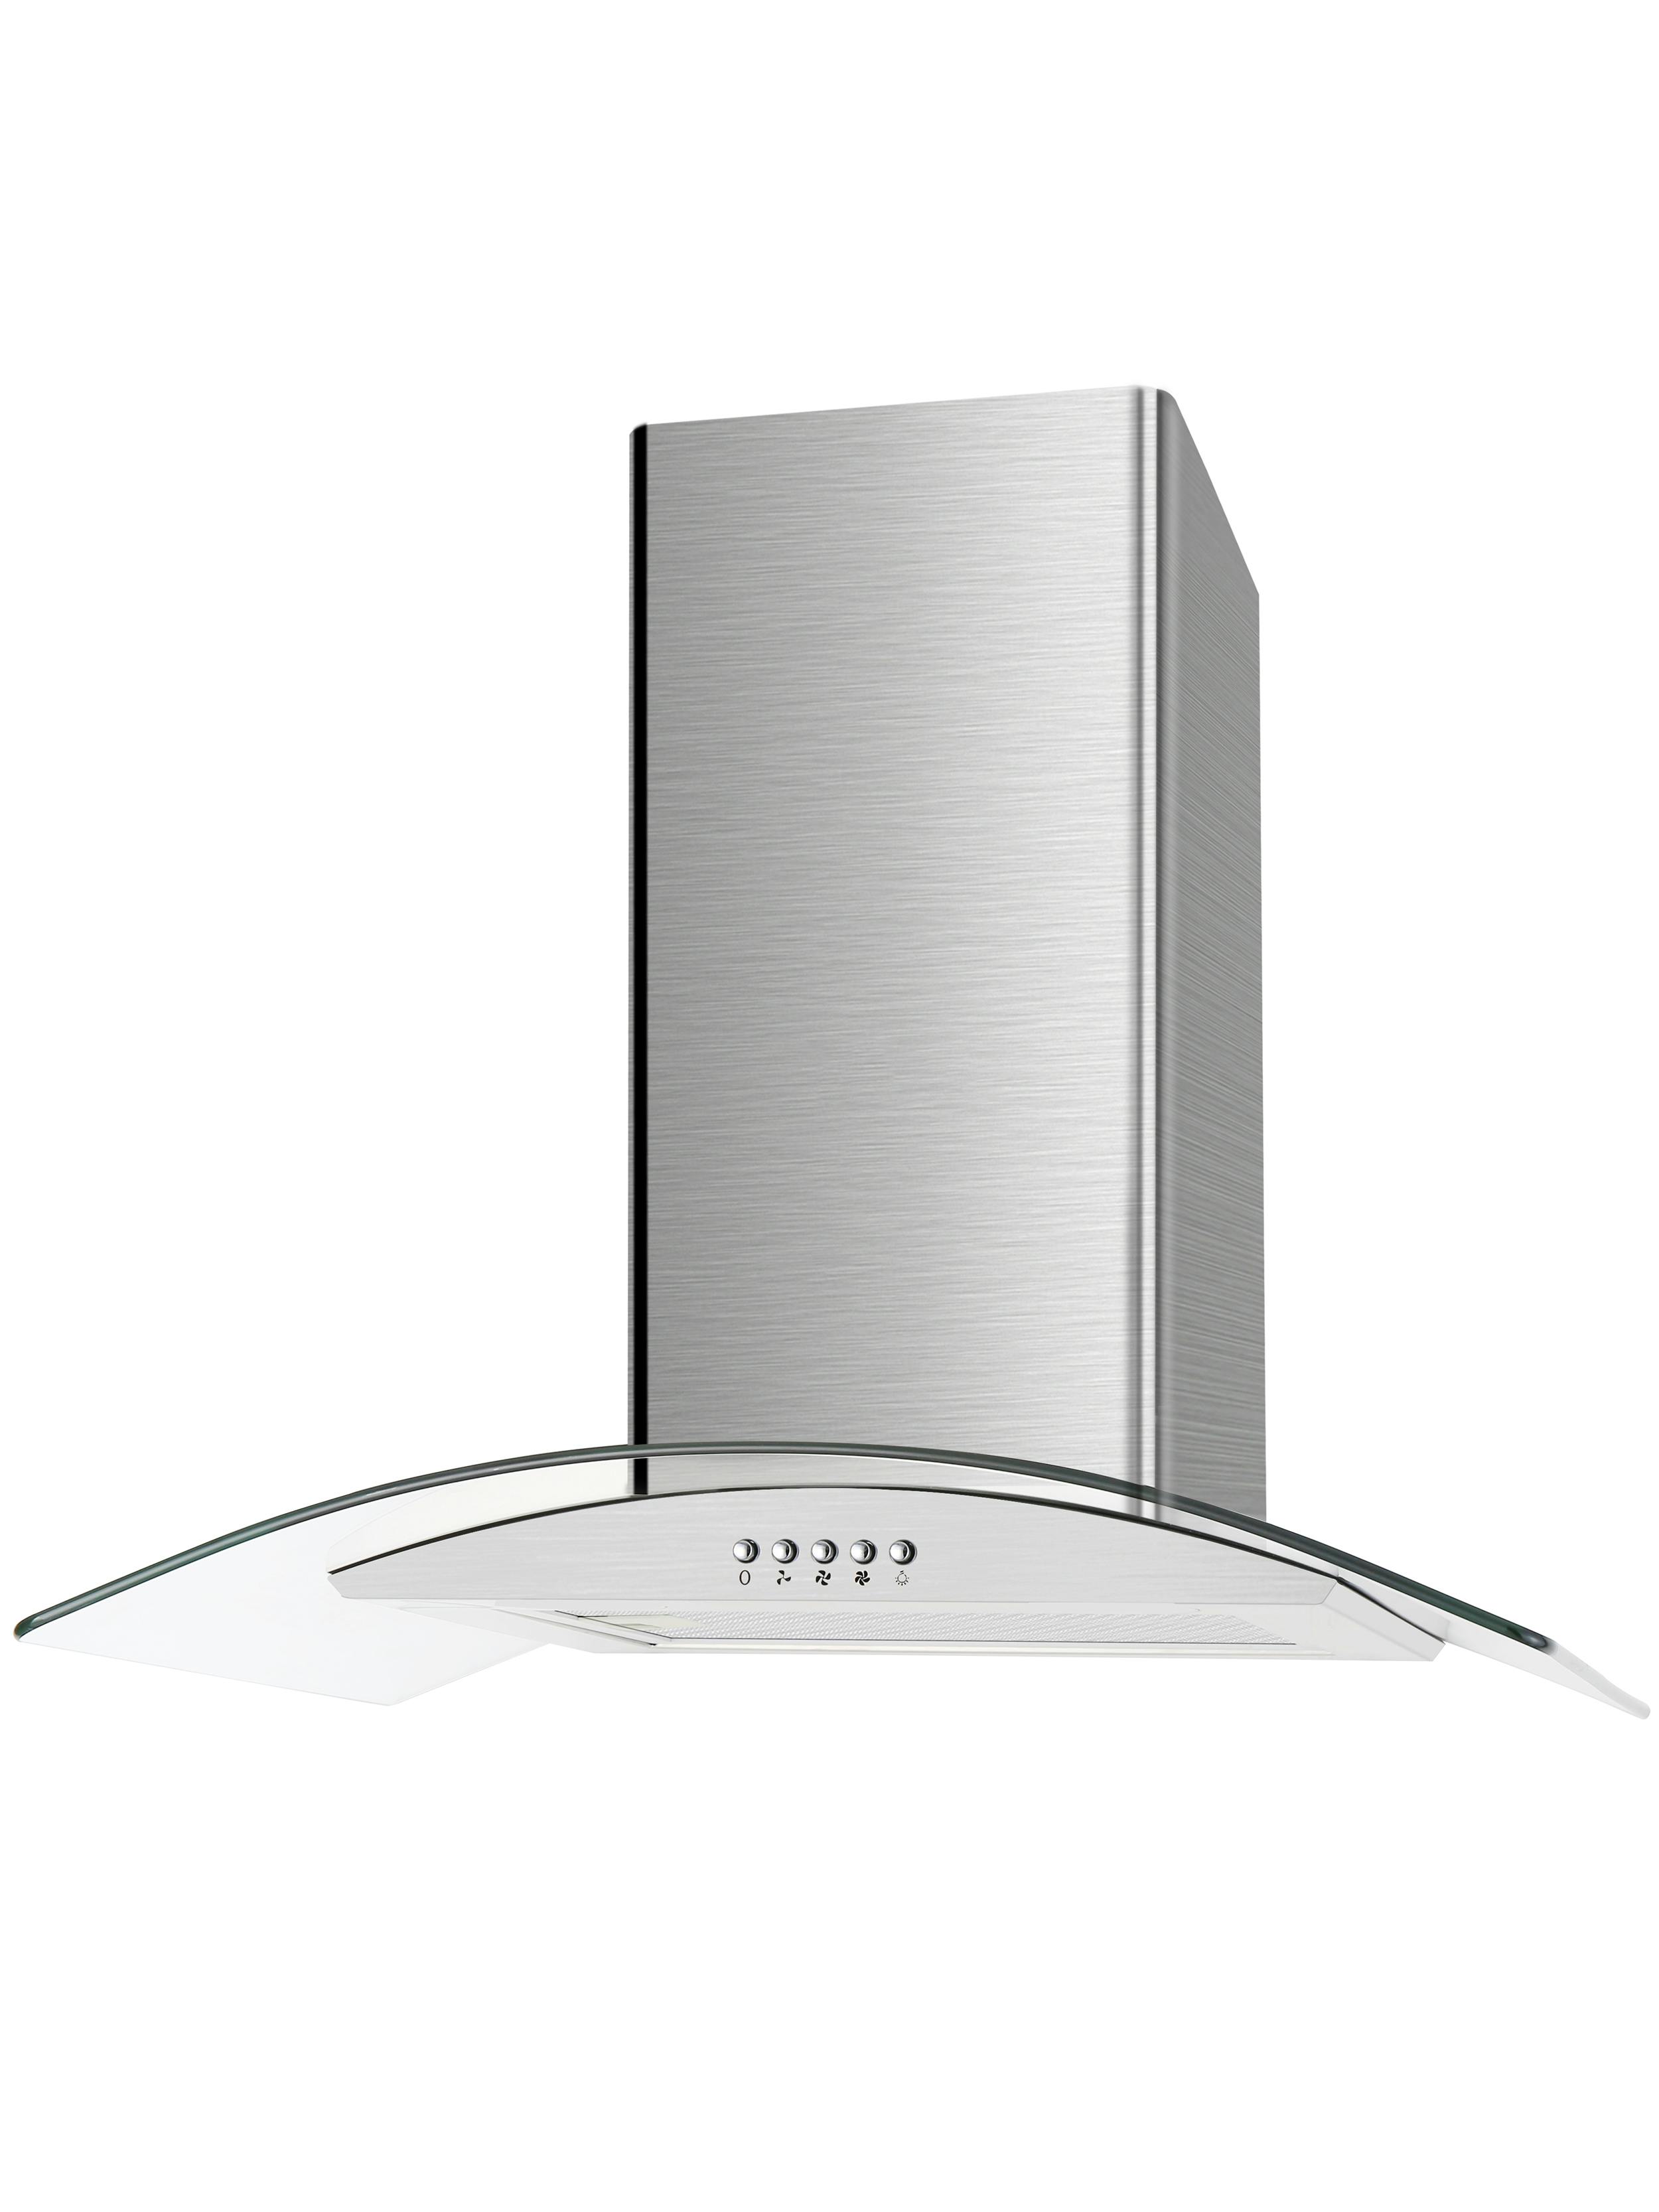 MyAppliances ART28369 60cm Curved Glass Chimney Cooker Hood Stainless Steel 